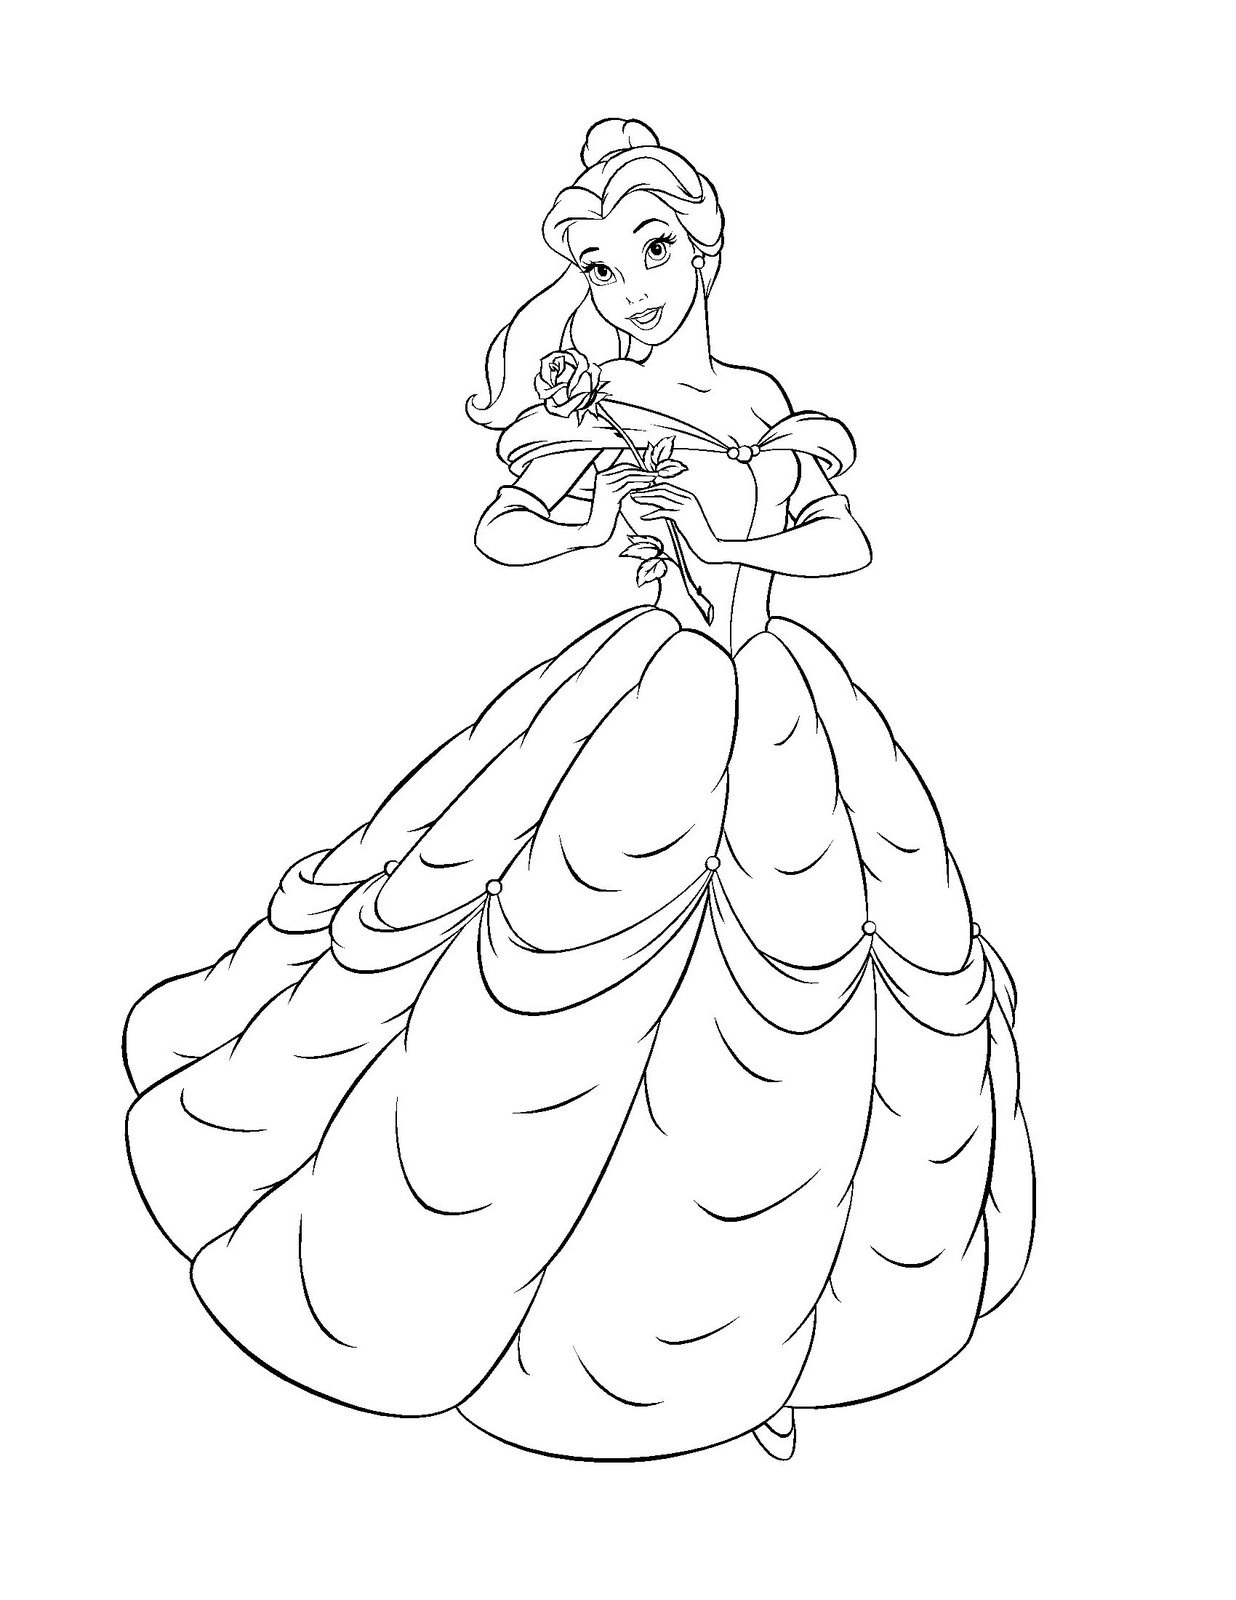 Top 50 Free Printable Unicorn 16+ Coloring Pages Of Disney Princess Belle